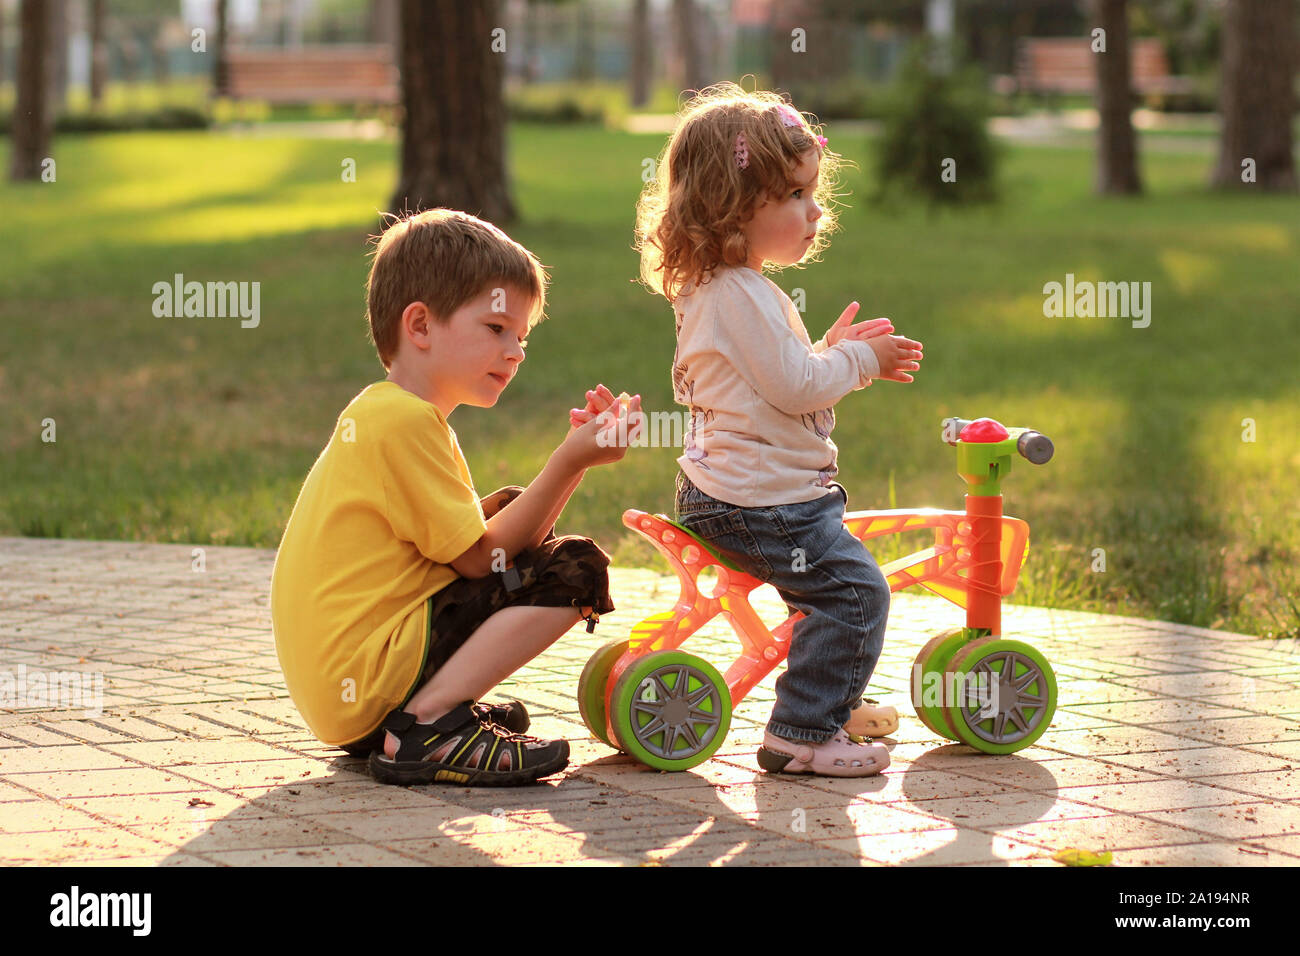 Little girl riding a small bike in the sunlit summer park and playing with a brother Stock Photo